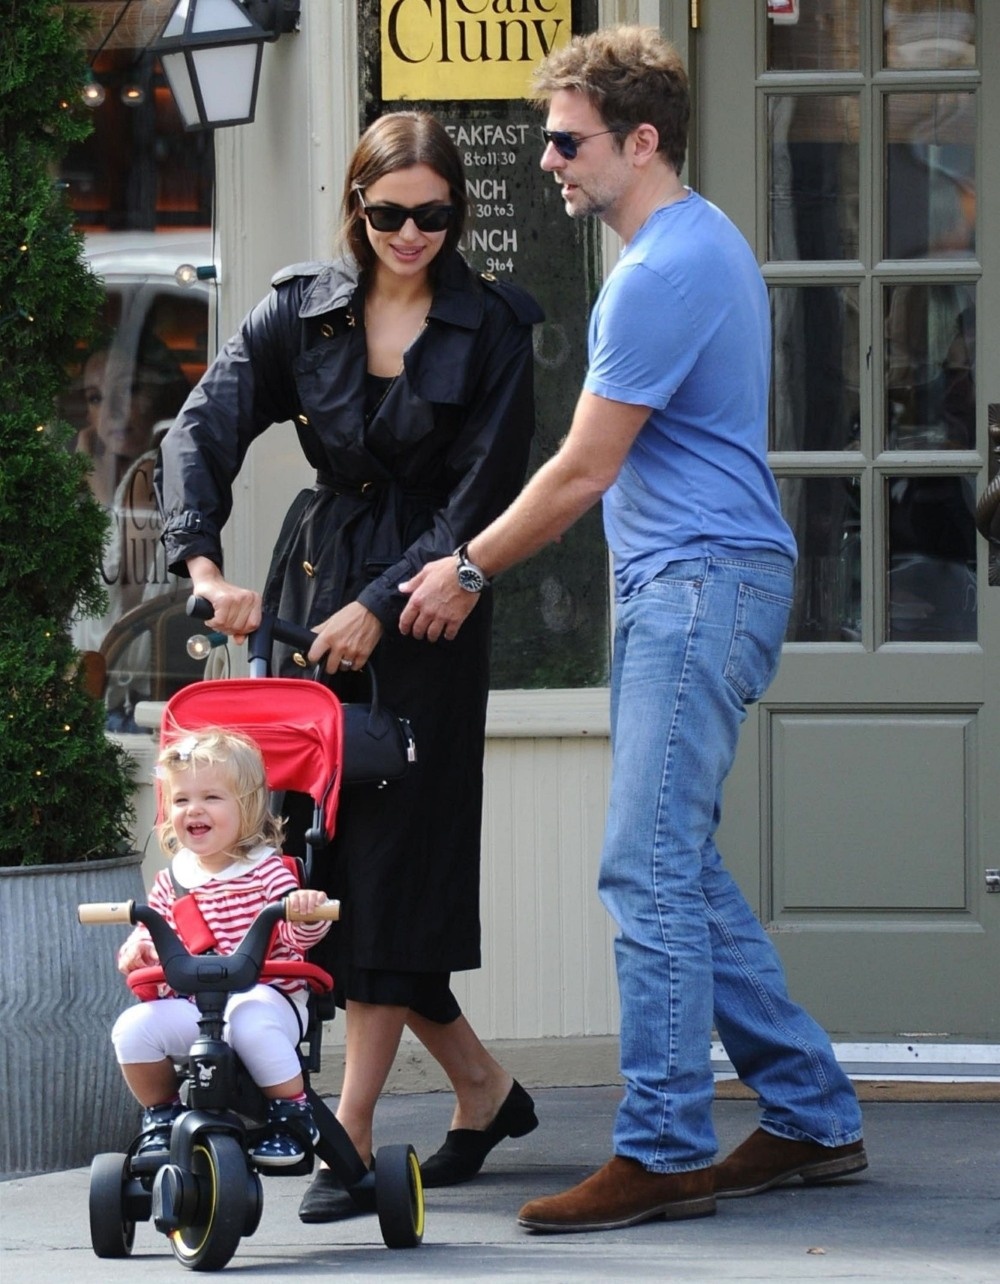 Bradley Cooper and Irina Shayk leaving Cafe Cluny after brunch with their daughter